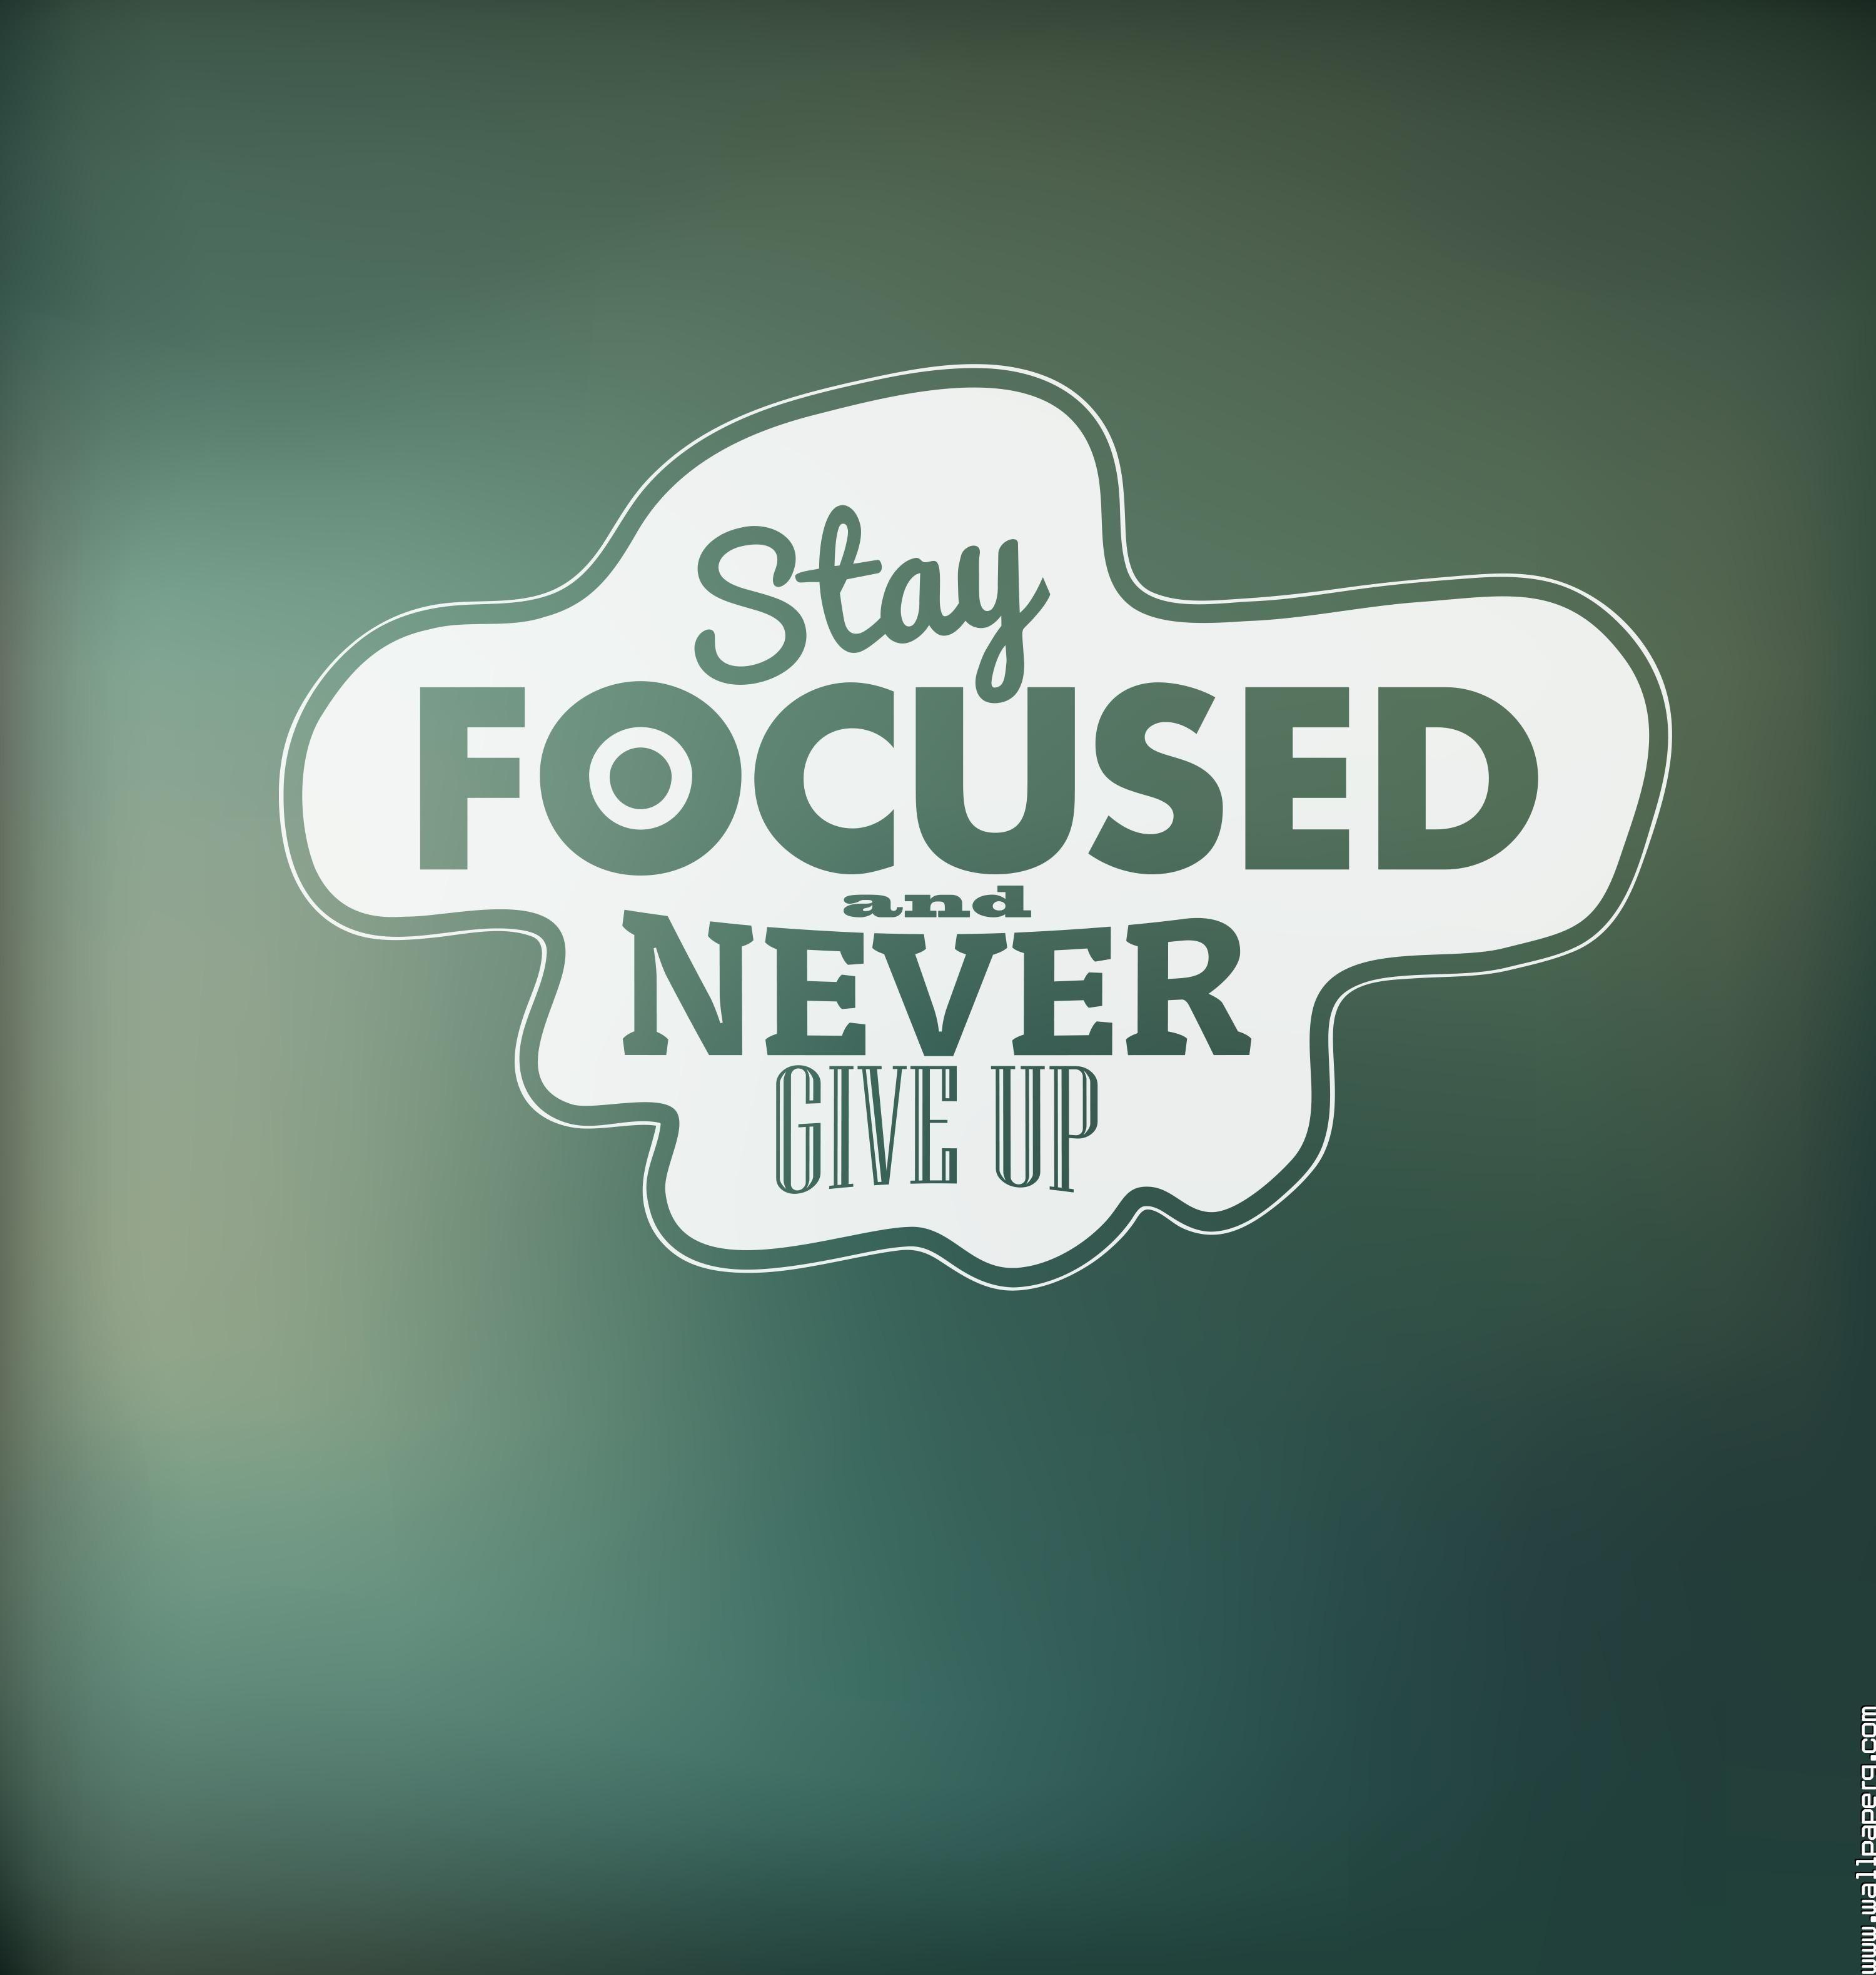 Download Stay focused and never give up motivational quote saying wallpaper for your mobile cell phone